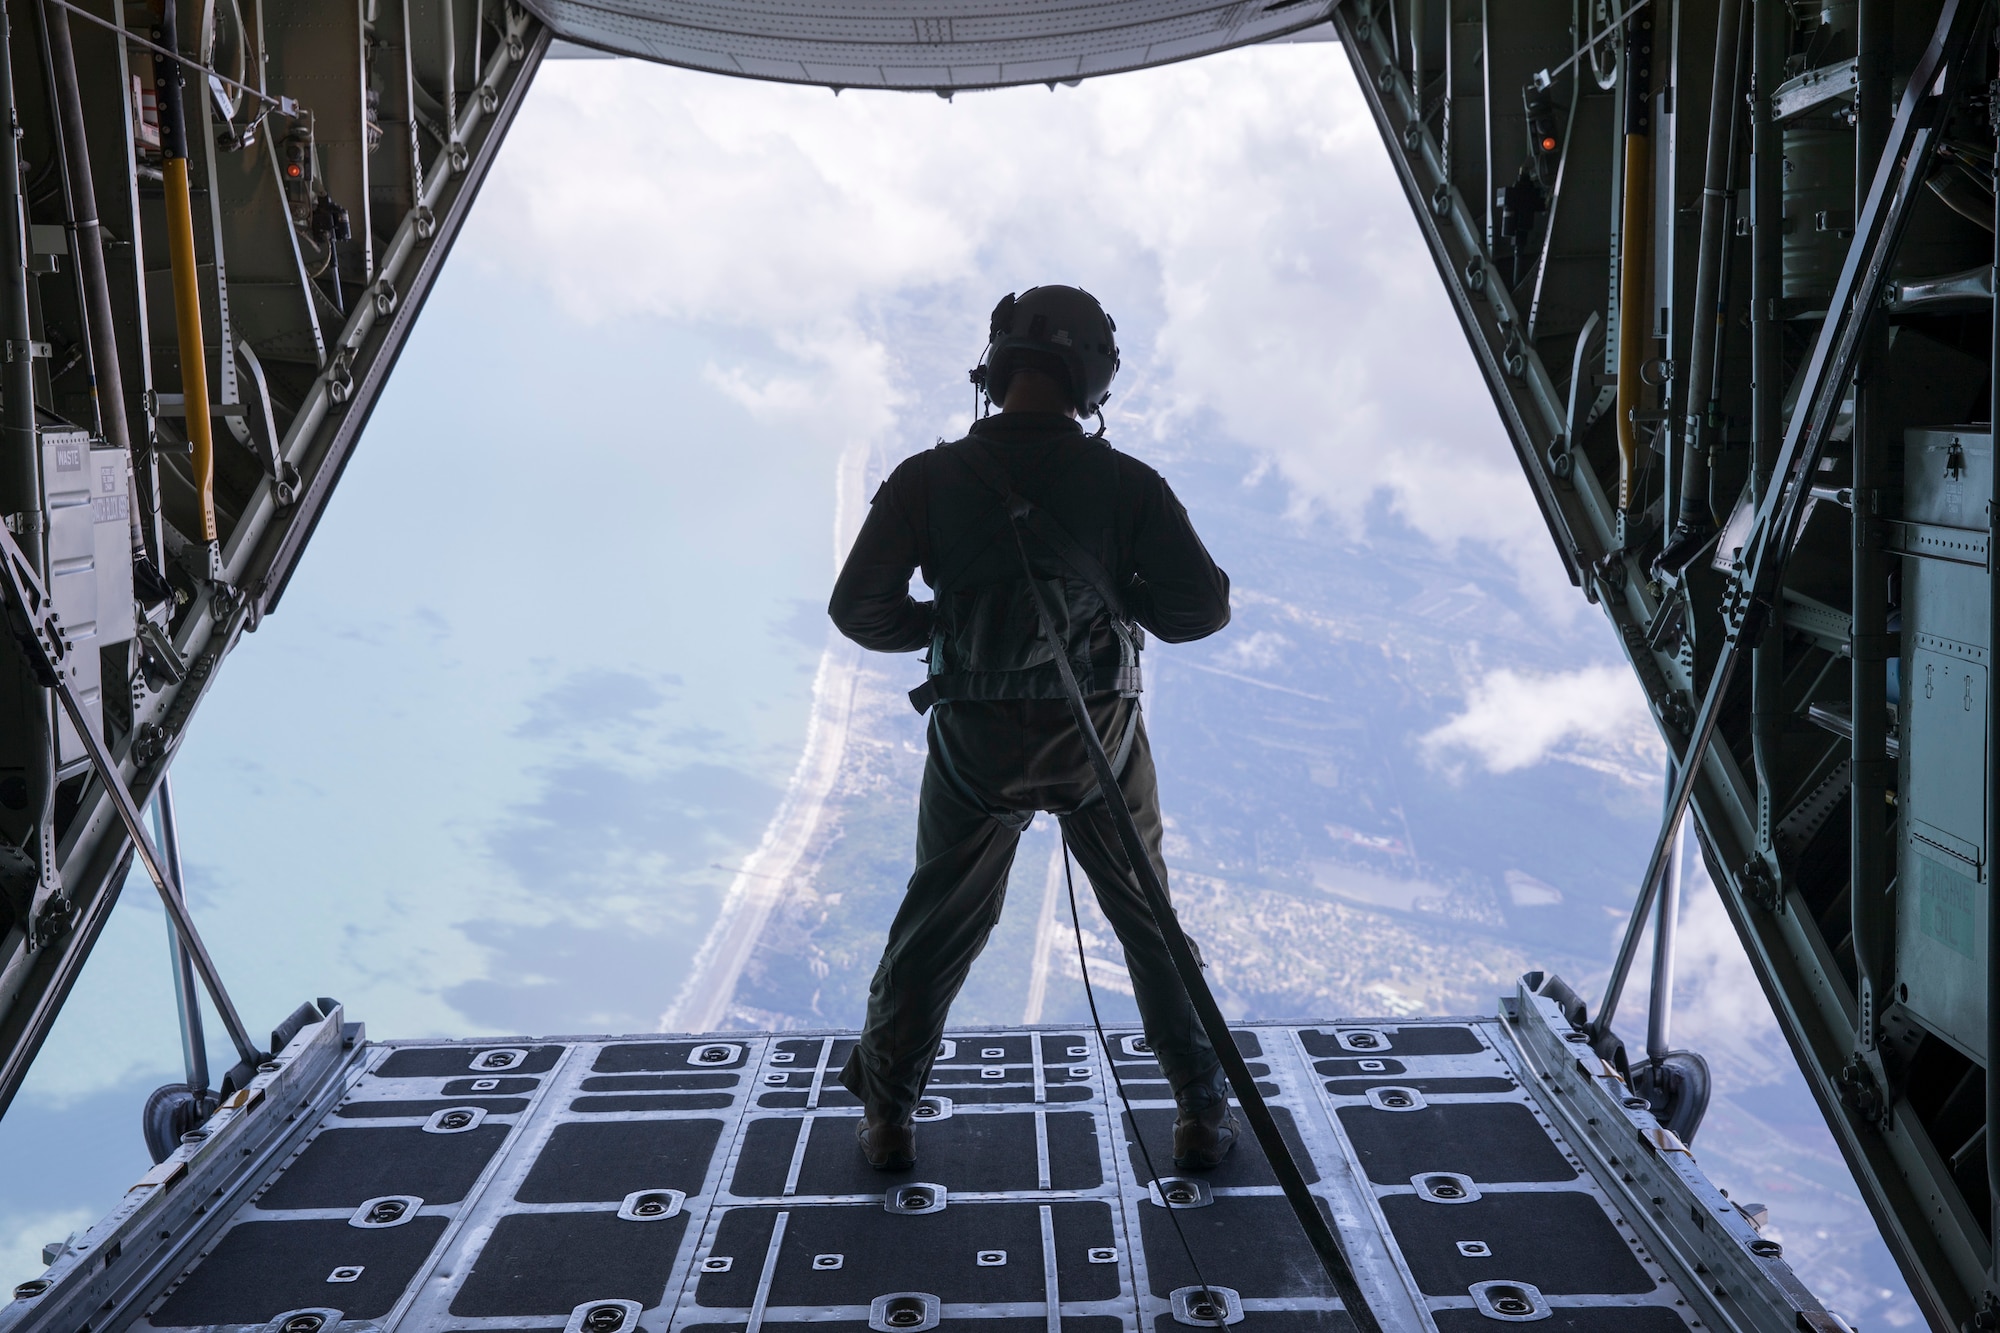 Master Sgt. Eric Schraeder, loadmaster with the 934th Airlift Wing, watches the descent of the SOCOM Para-Commandos after they depart the C-130 for their performance at the Wings Over Myrtle Beach Air Show April 27, 2018.  The SOCOM Para-Commandos are the only joint military demonstration team in the DoD; the aircrew from Minneapolis-St. Paul International Airport Air Reserve Station provided the jump team's airlift at the show. (Photo Courtesy Jason Lee, Sun News):